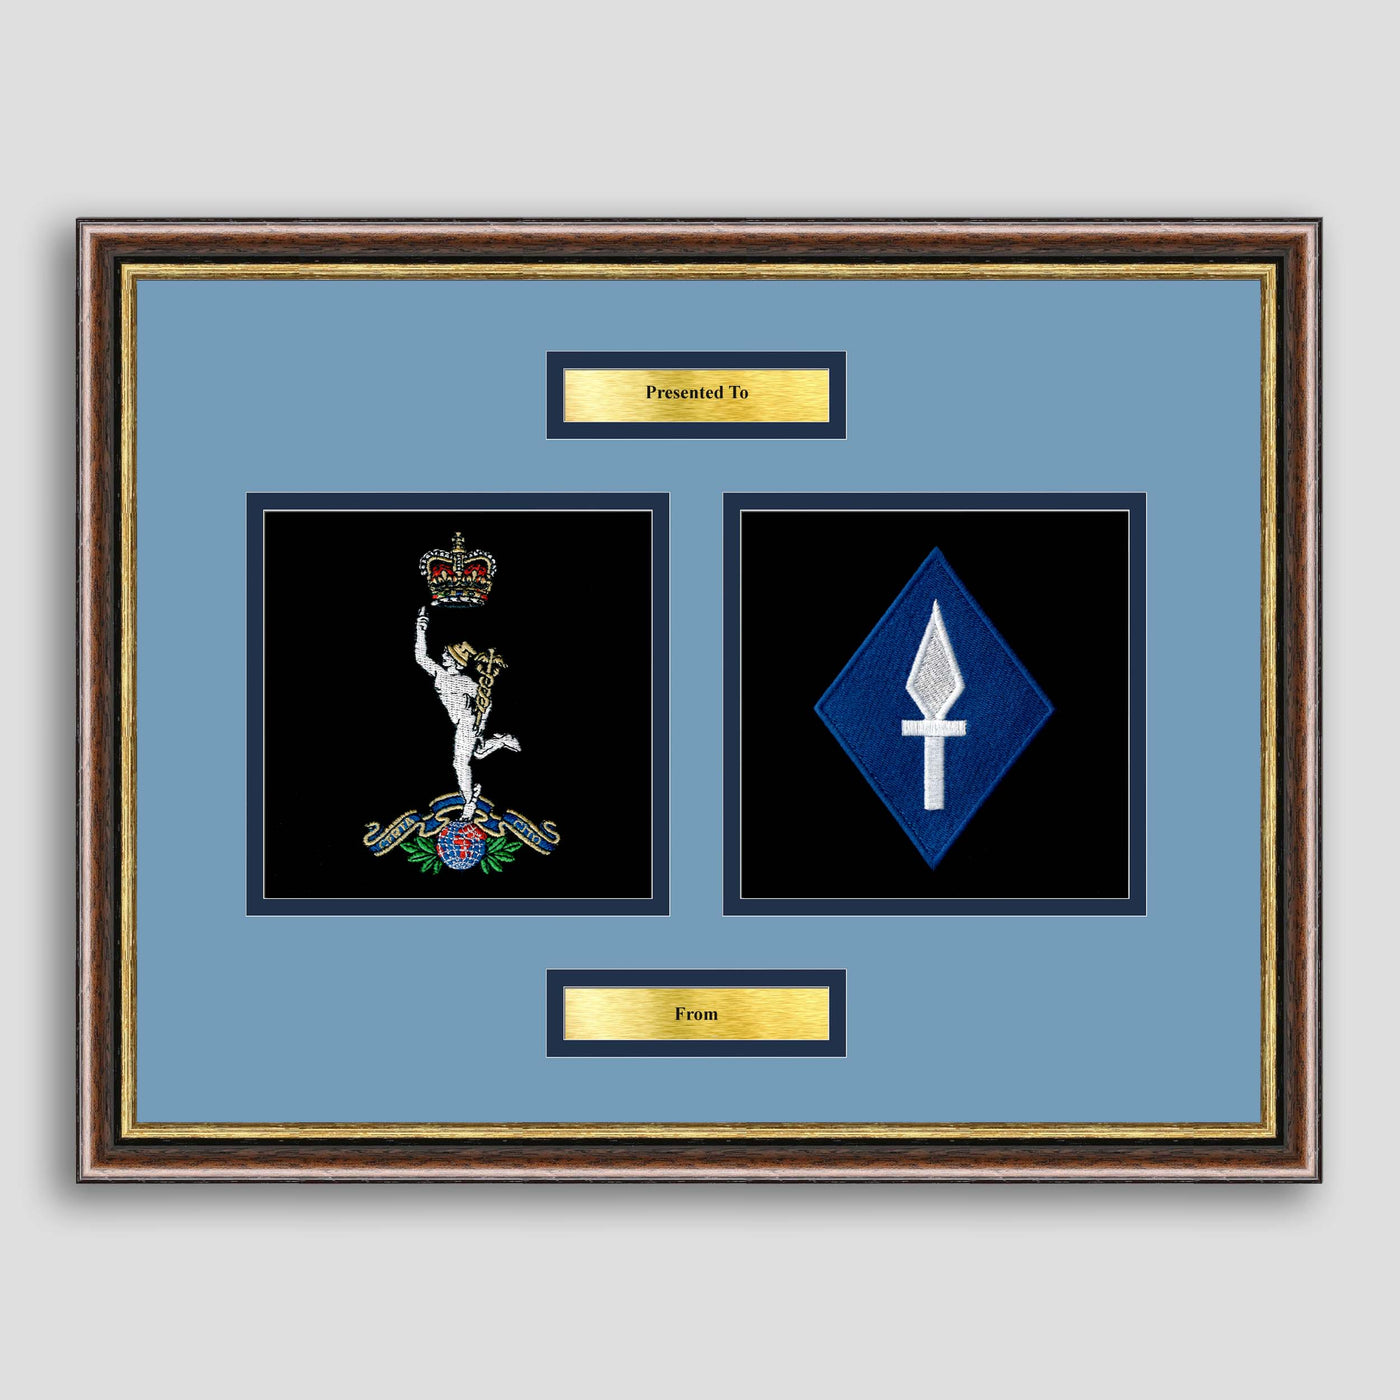 Corps of Signals & 1 Signals Brigade Framed Military Embroidery Presentation